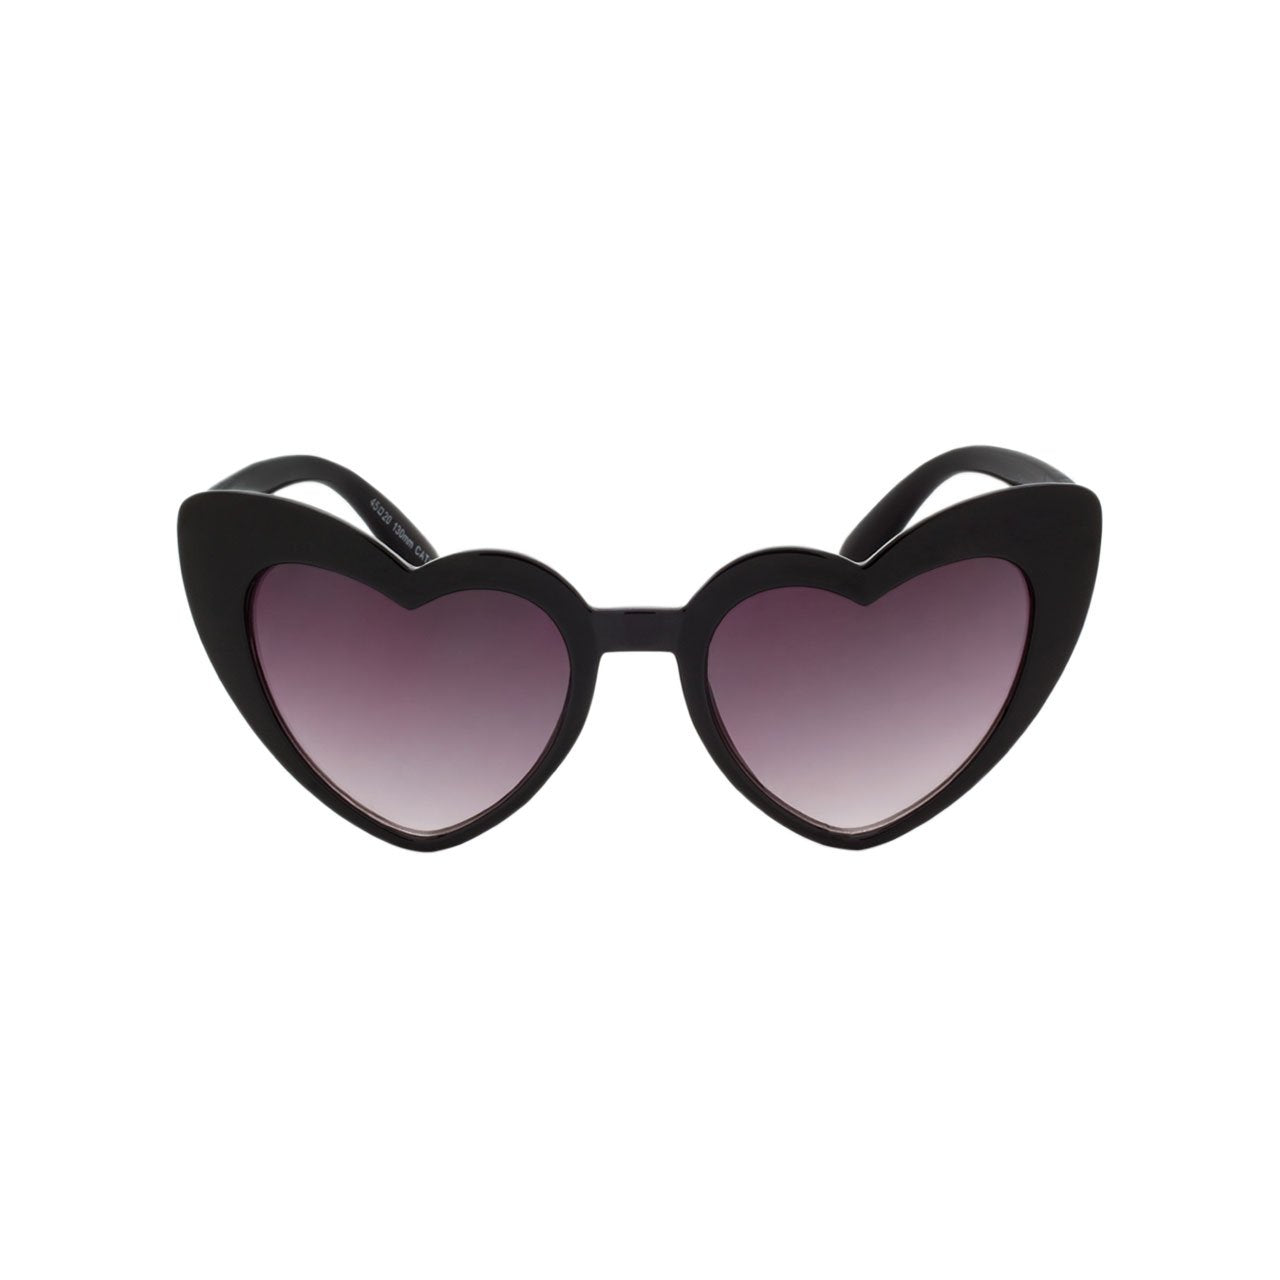 Wholesale Fashion Box Square Pink Sunglasses For Boys And Girls Trendy  UV400 Protection In 7 Trendful Colors From Melody2041, $26.86 | DHgate.Com